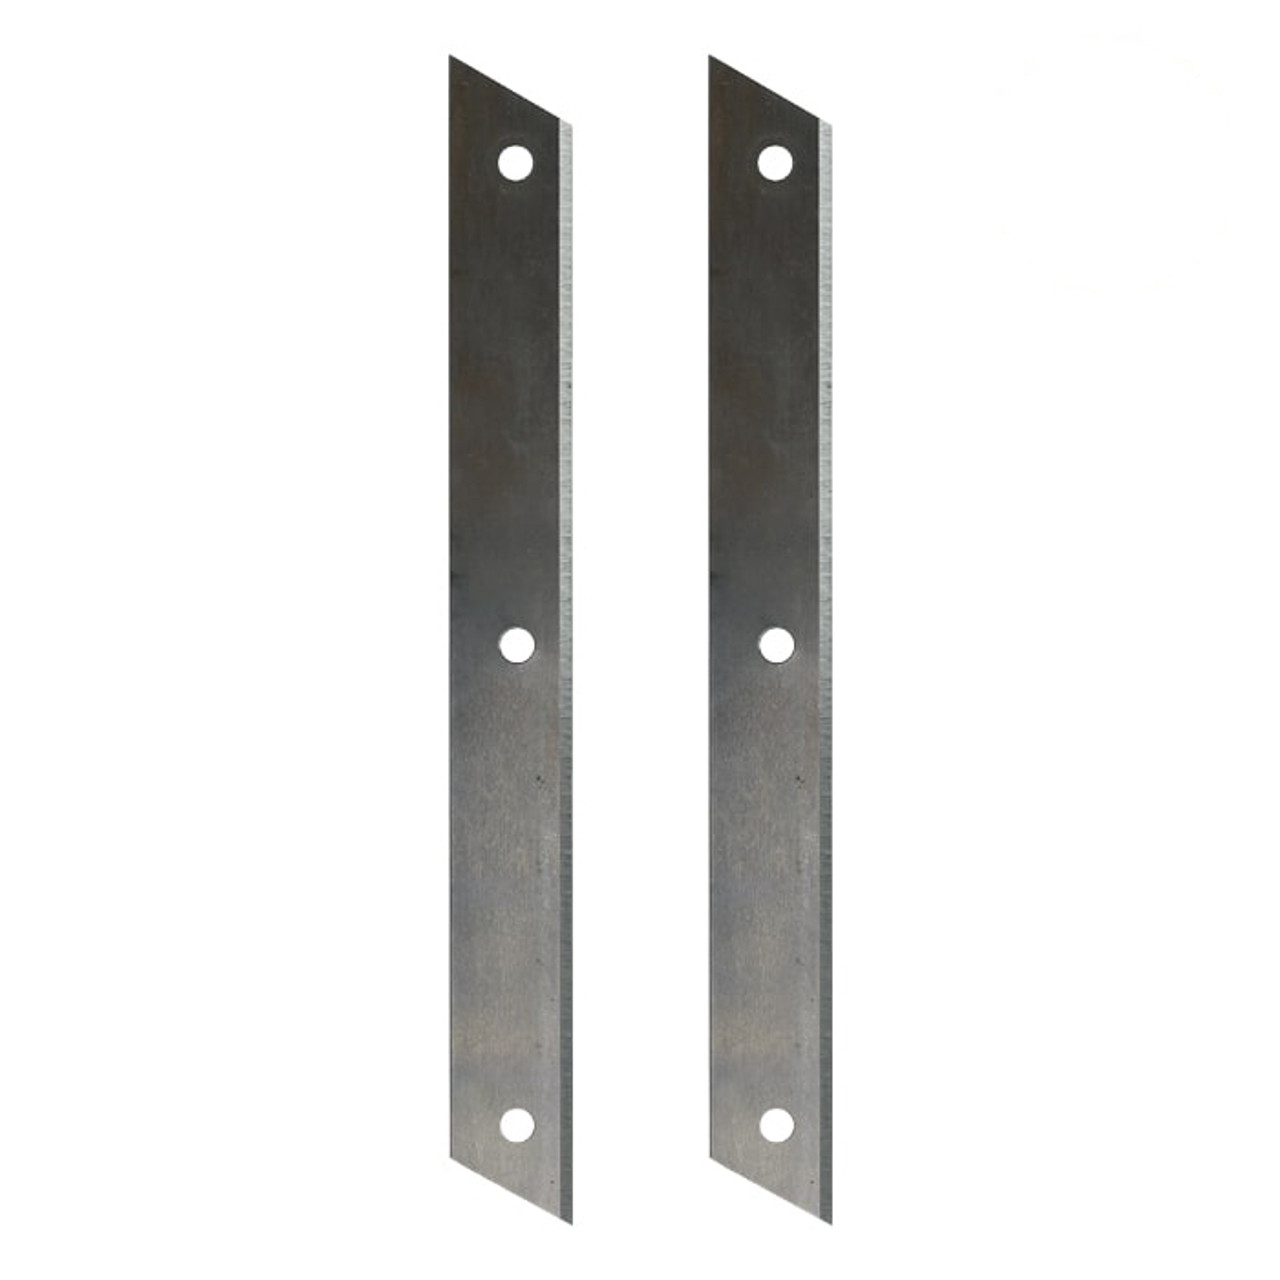 Pair of Replacement Blades for